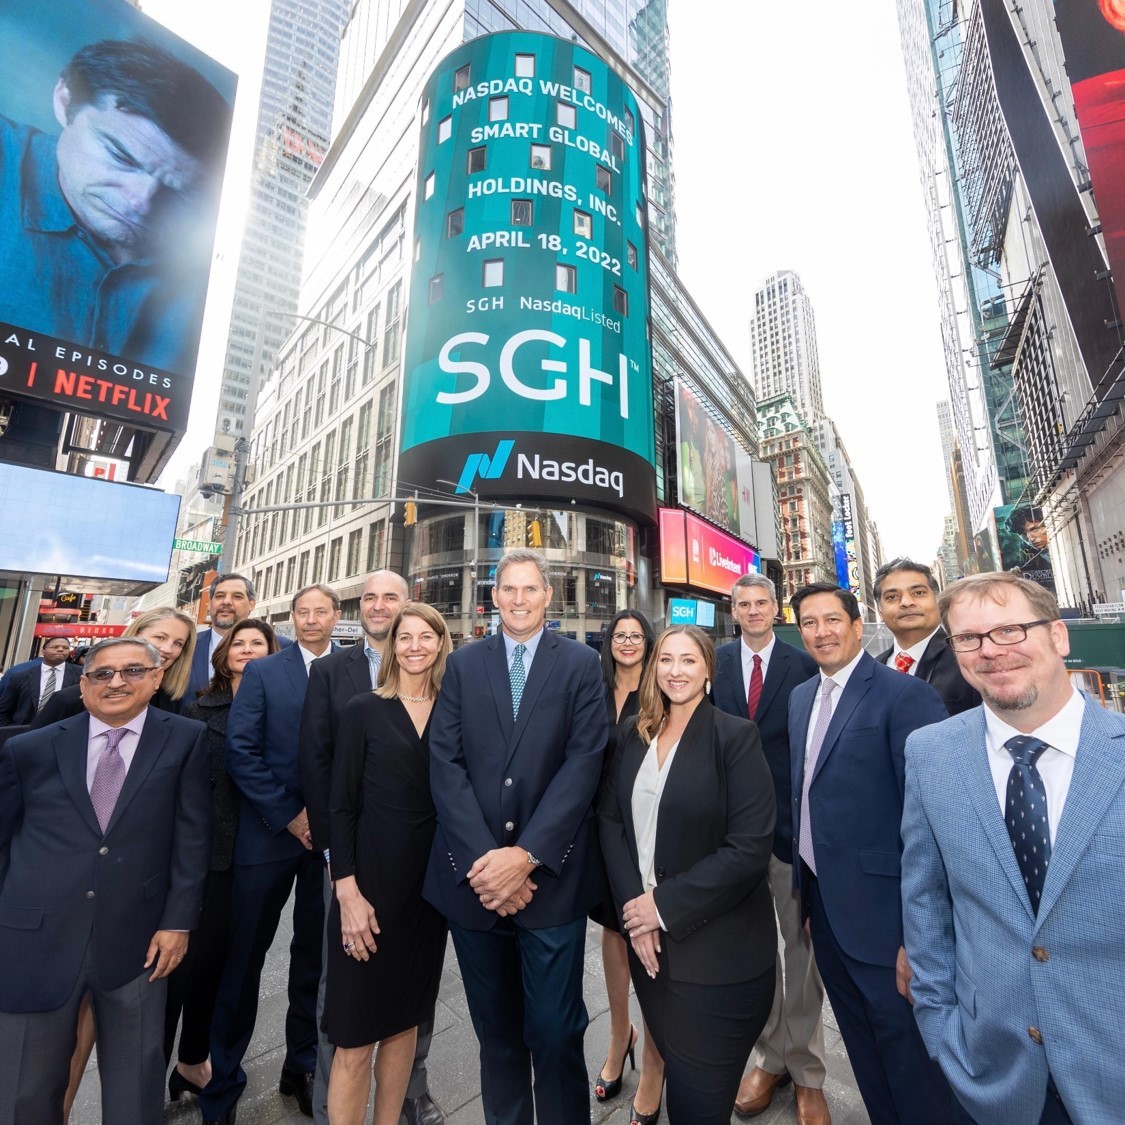 CEO Mark Adams with members of our team at the ringing of the Nasdaq bell.